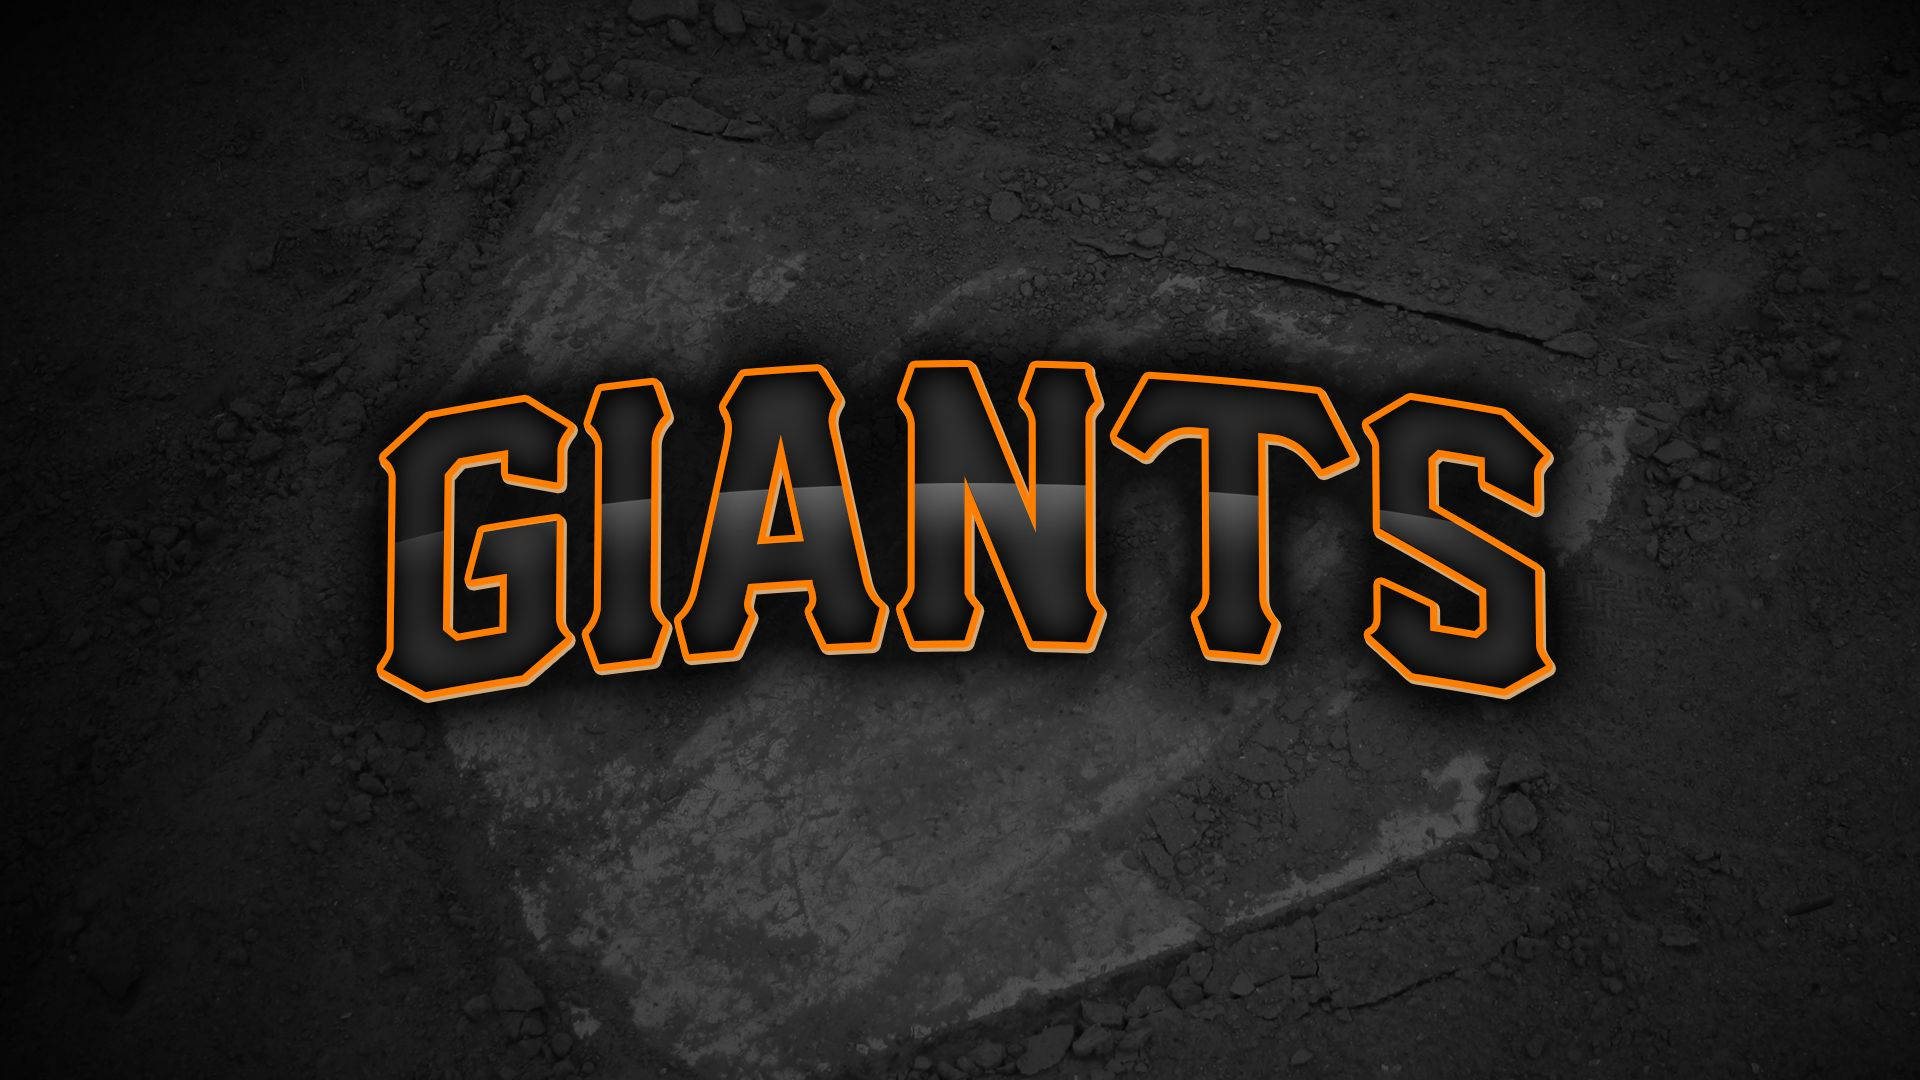 San Francisco Giants On Cement Background Wallpaper